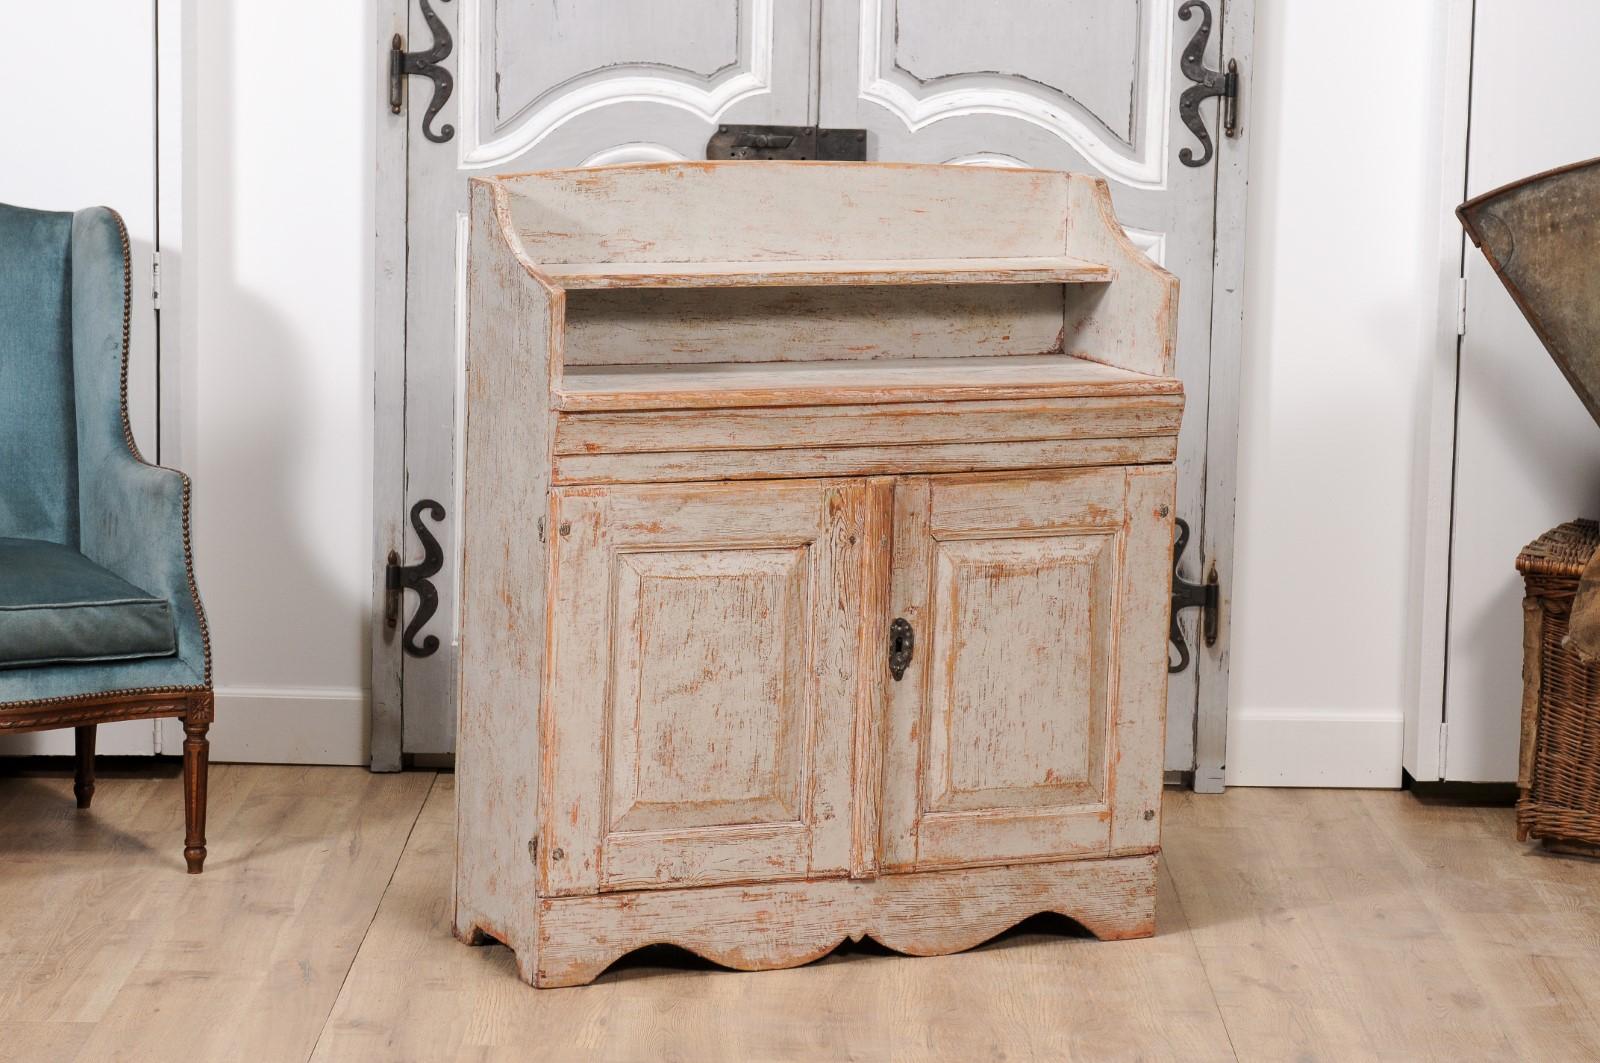 A Swedish late Gustavian period painted wood buffet from circa 1820 with open shelf in the upper section, two doors below and scalloped plinth.  Emanating the refined charm of the late Gustavian period, this Swedish painted wood buffet from circa